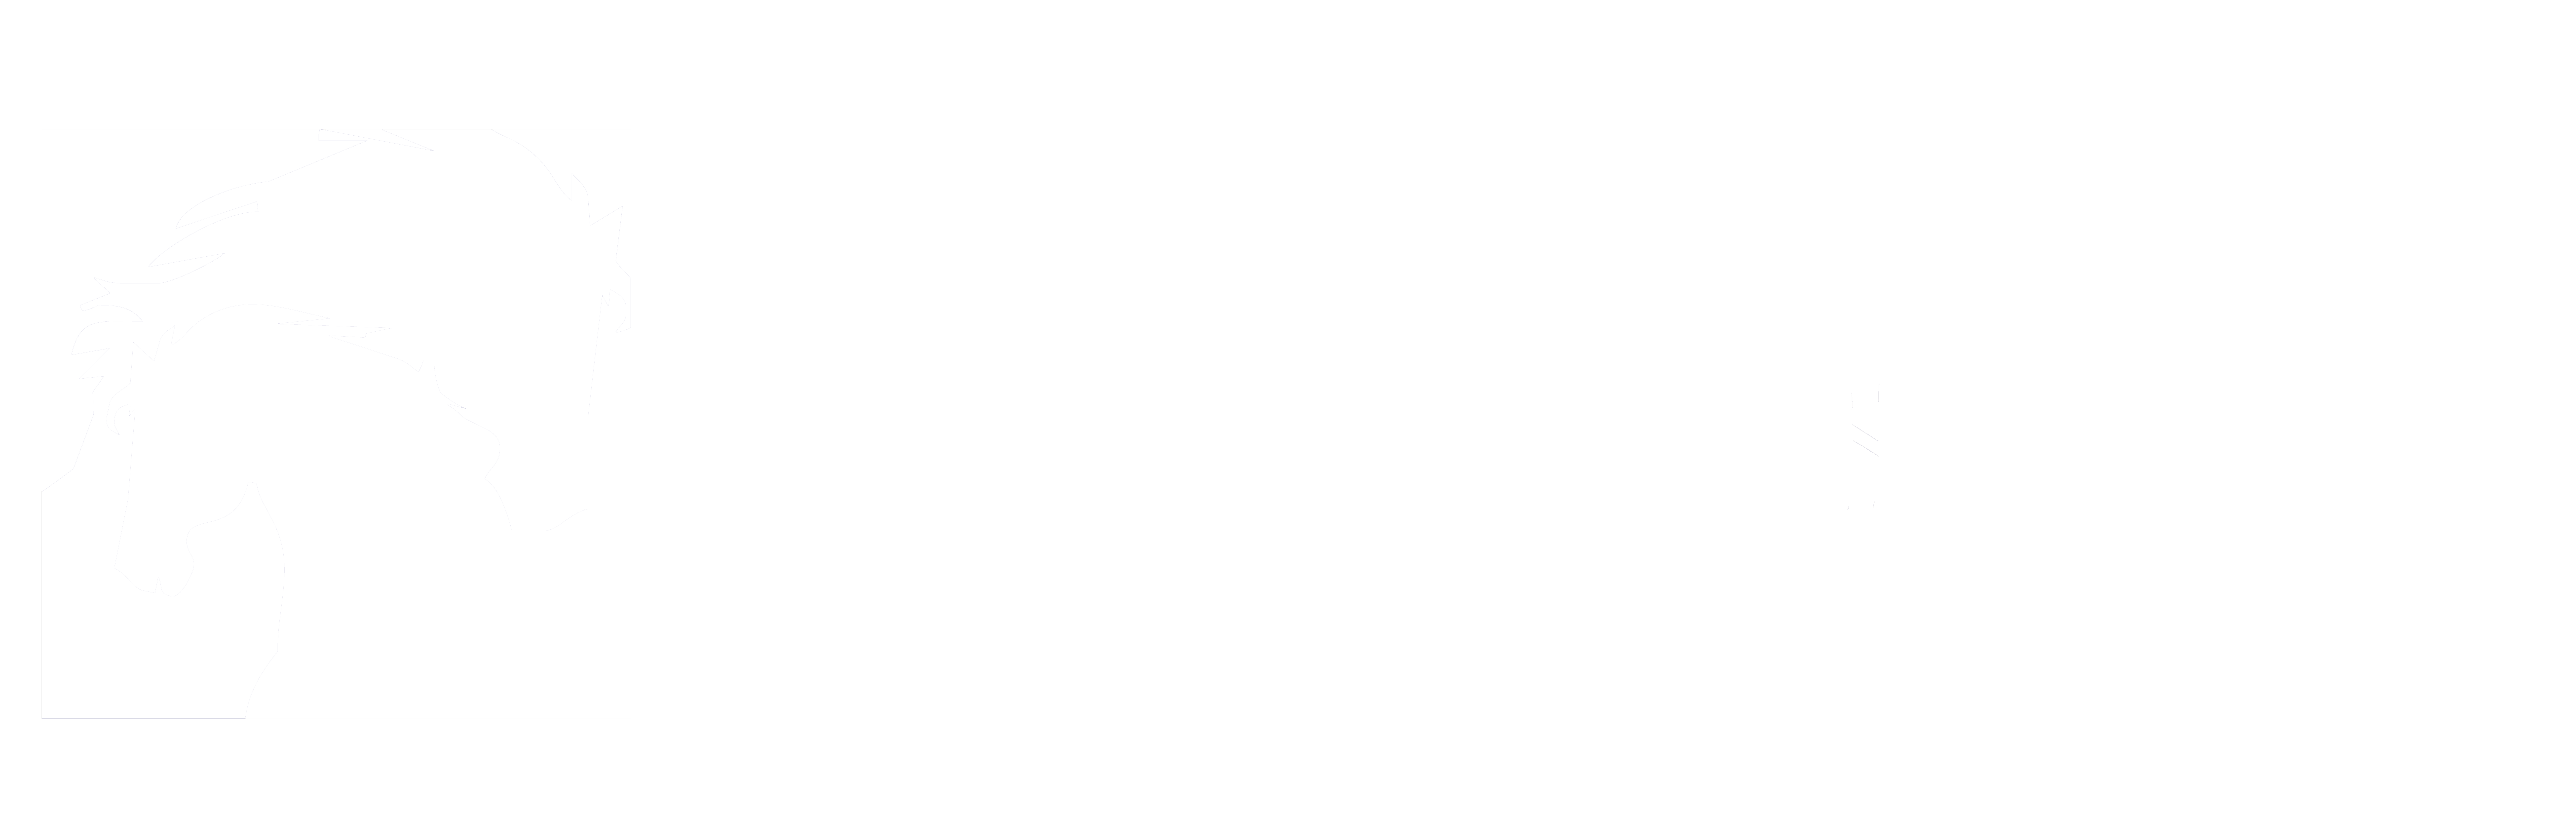 Mare and Foal Logo - Home Mare & Foal Sanctuary